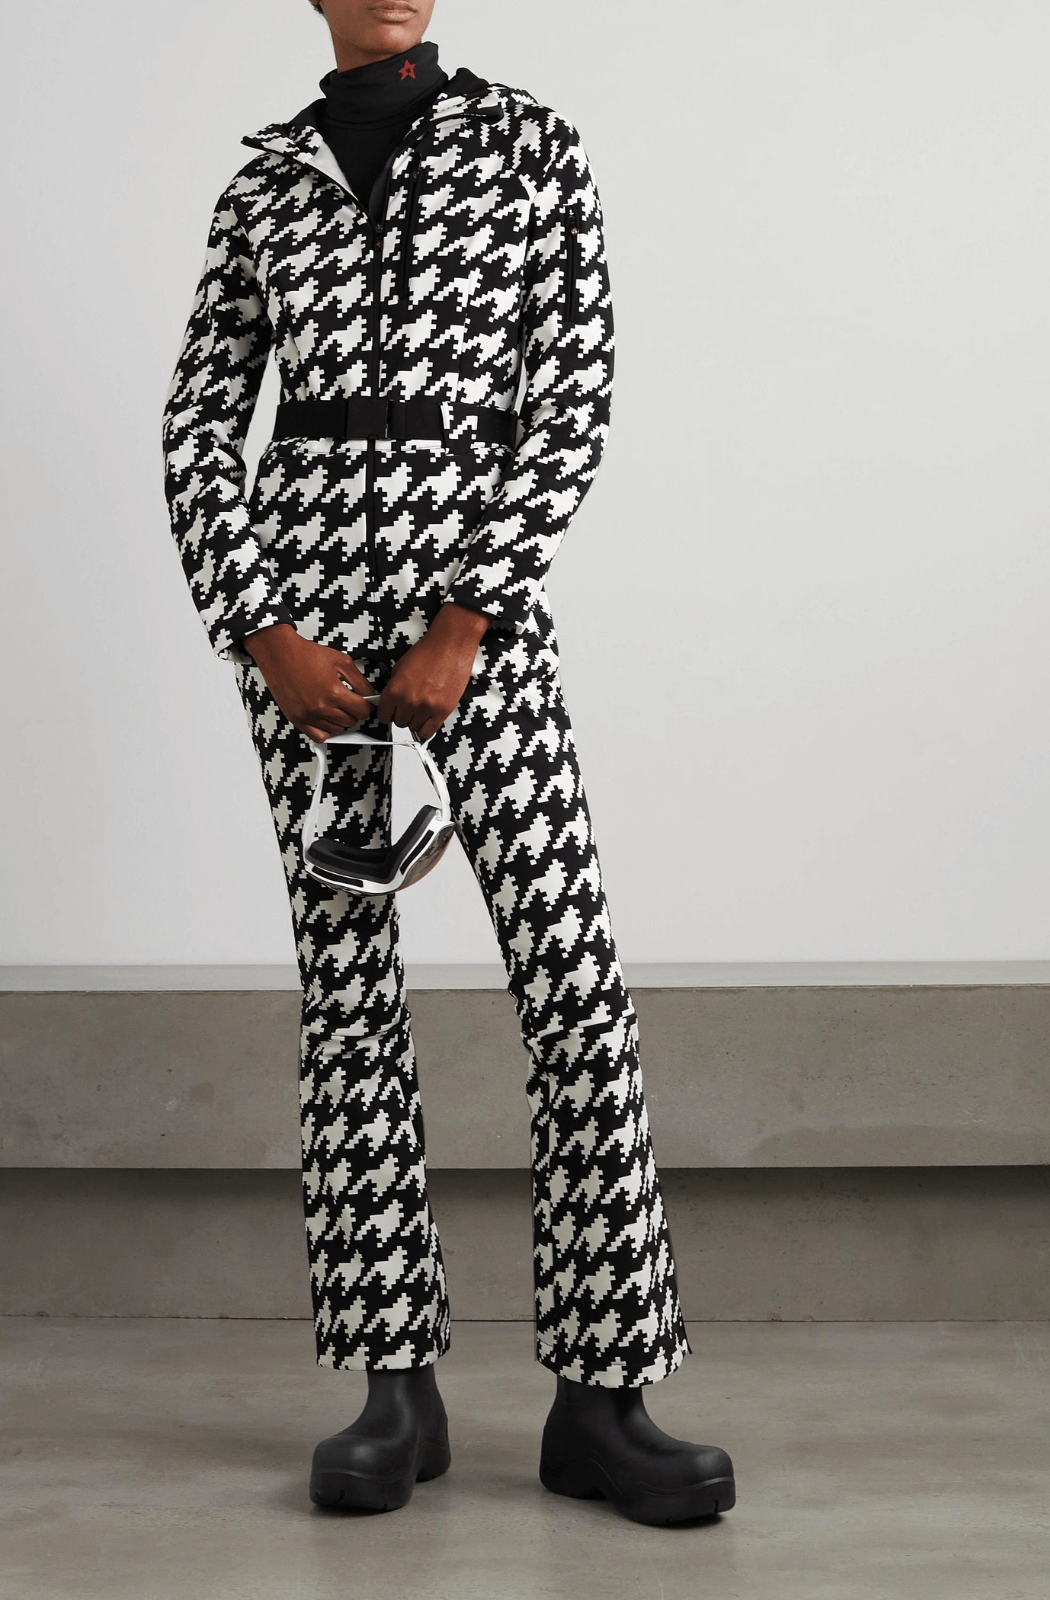 Perfect Moment Ski Suit Star Print Houndstooth model wearing ski suit via Net-a-Porter